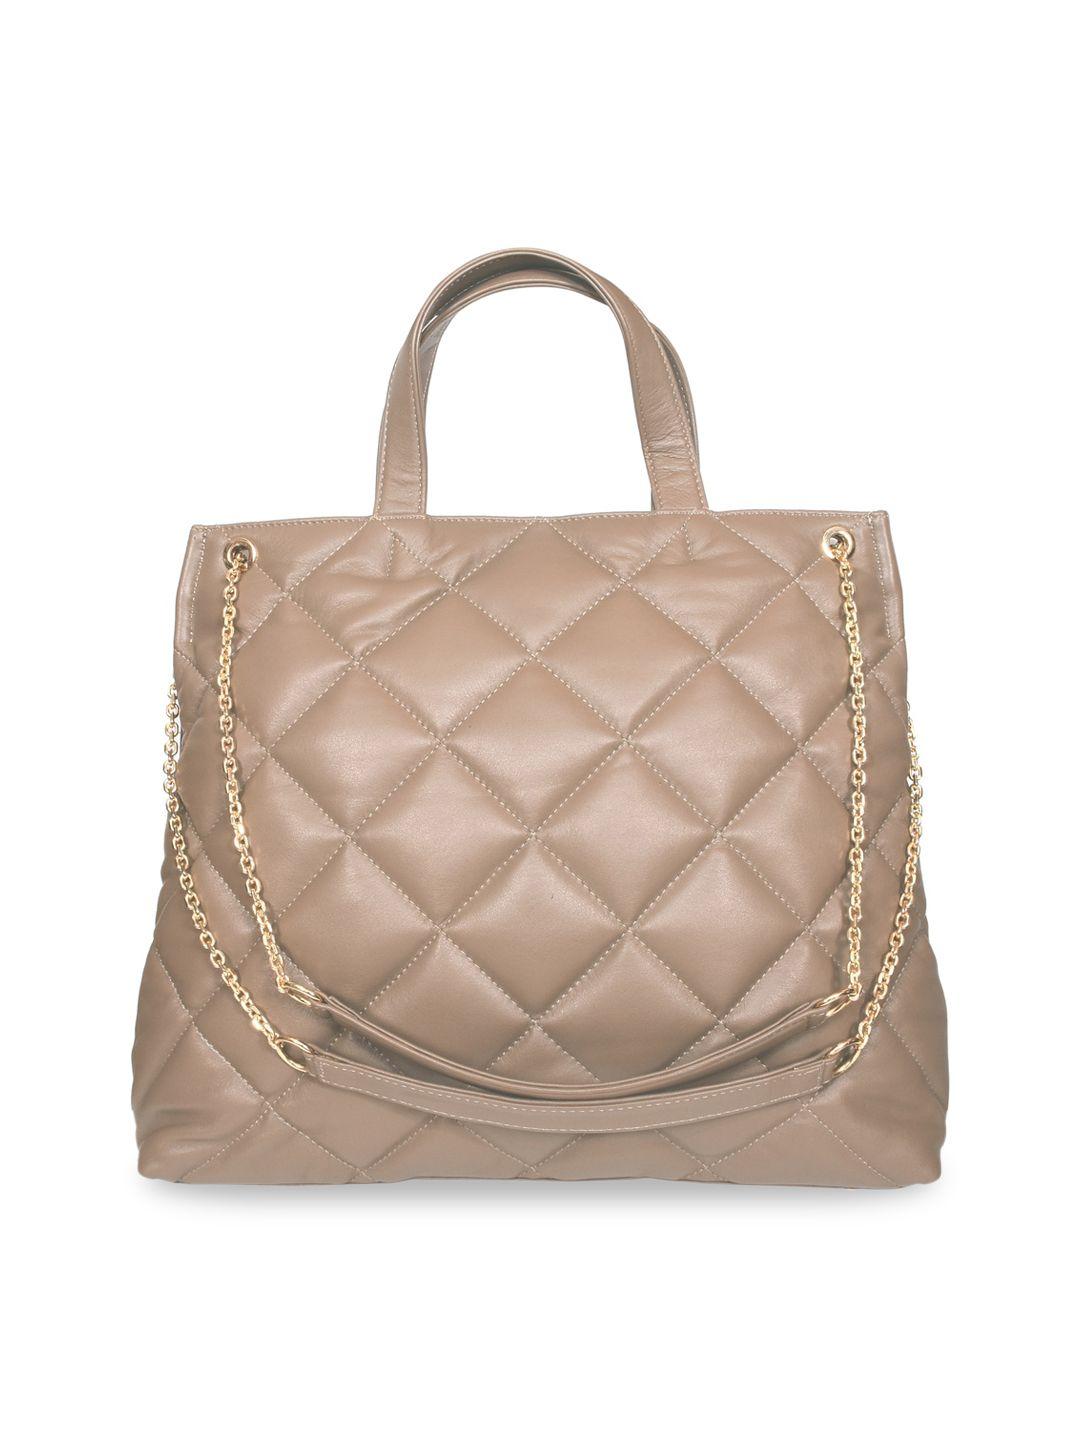 sassora taupe textured leather structured handheld bag with quilted